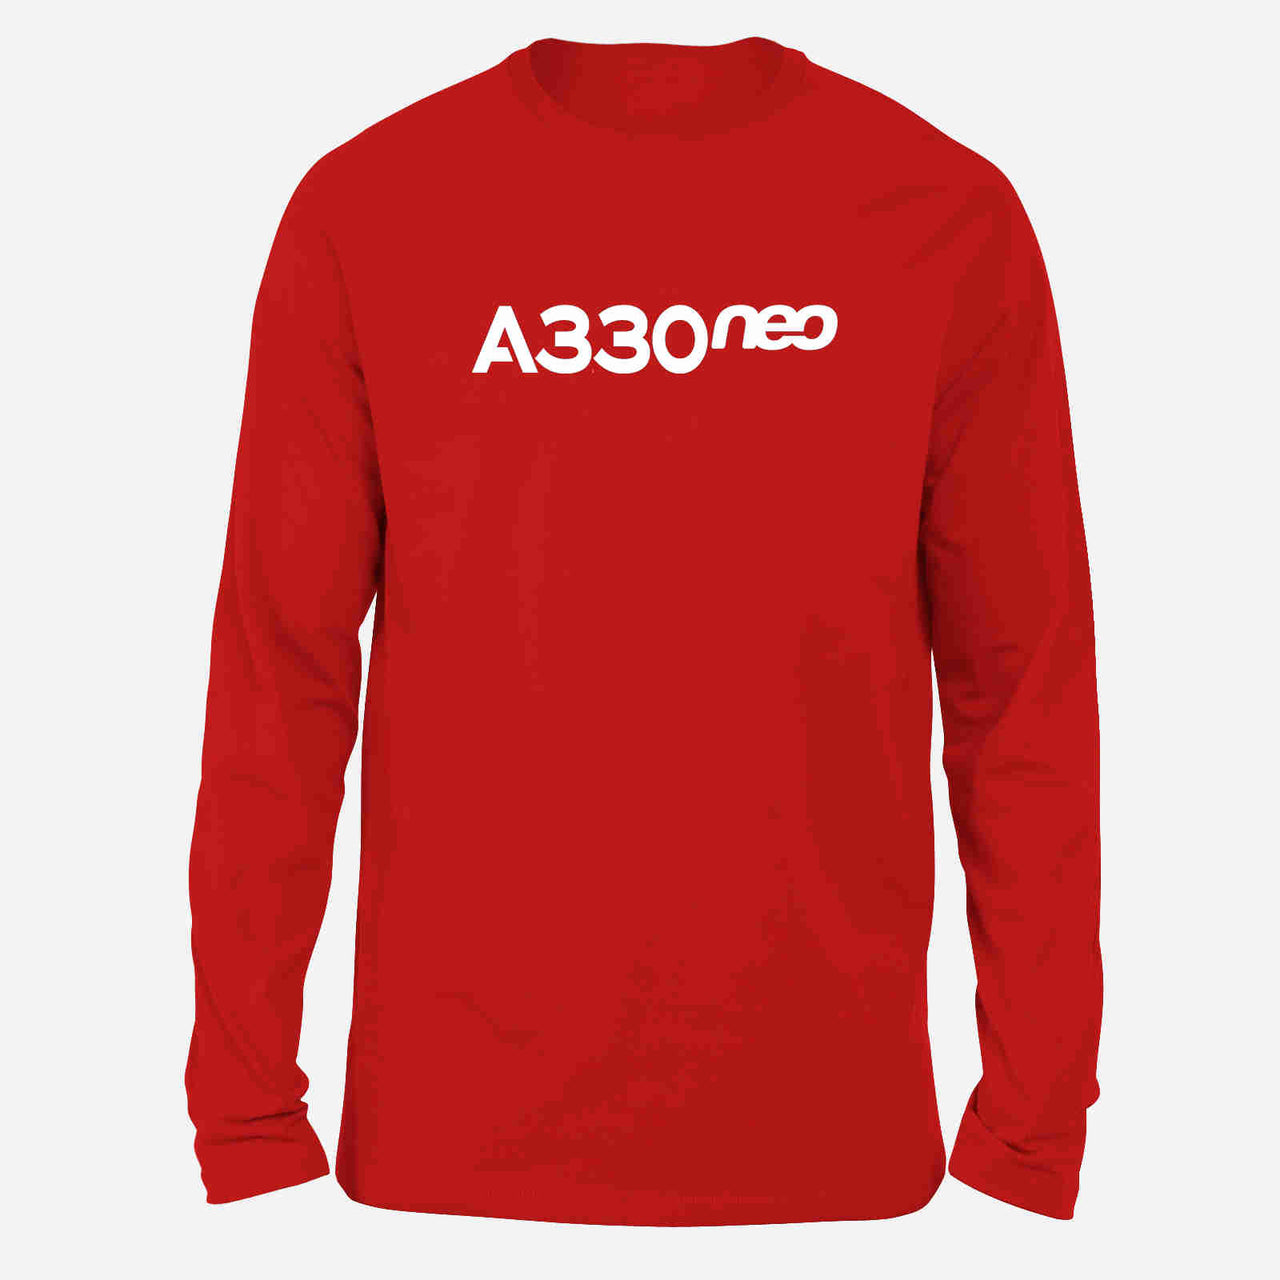 A330neo & Text Designed Long-Sleeve T-Shirts